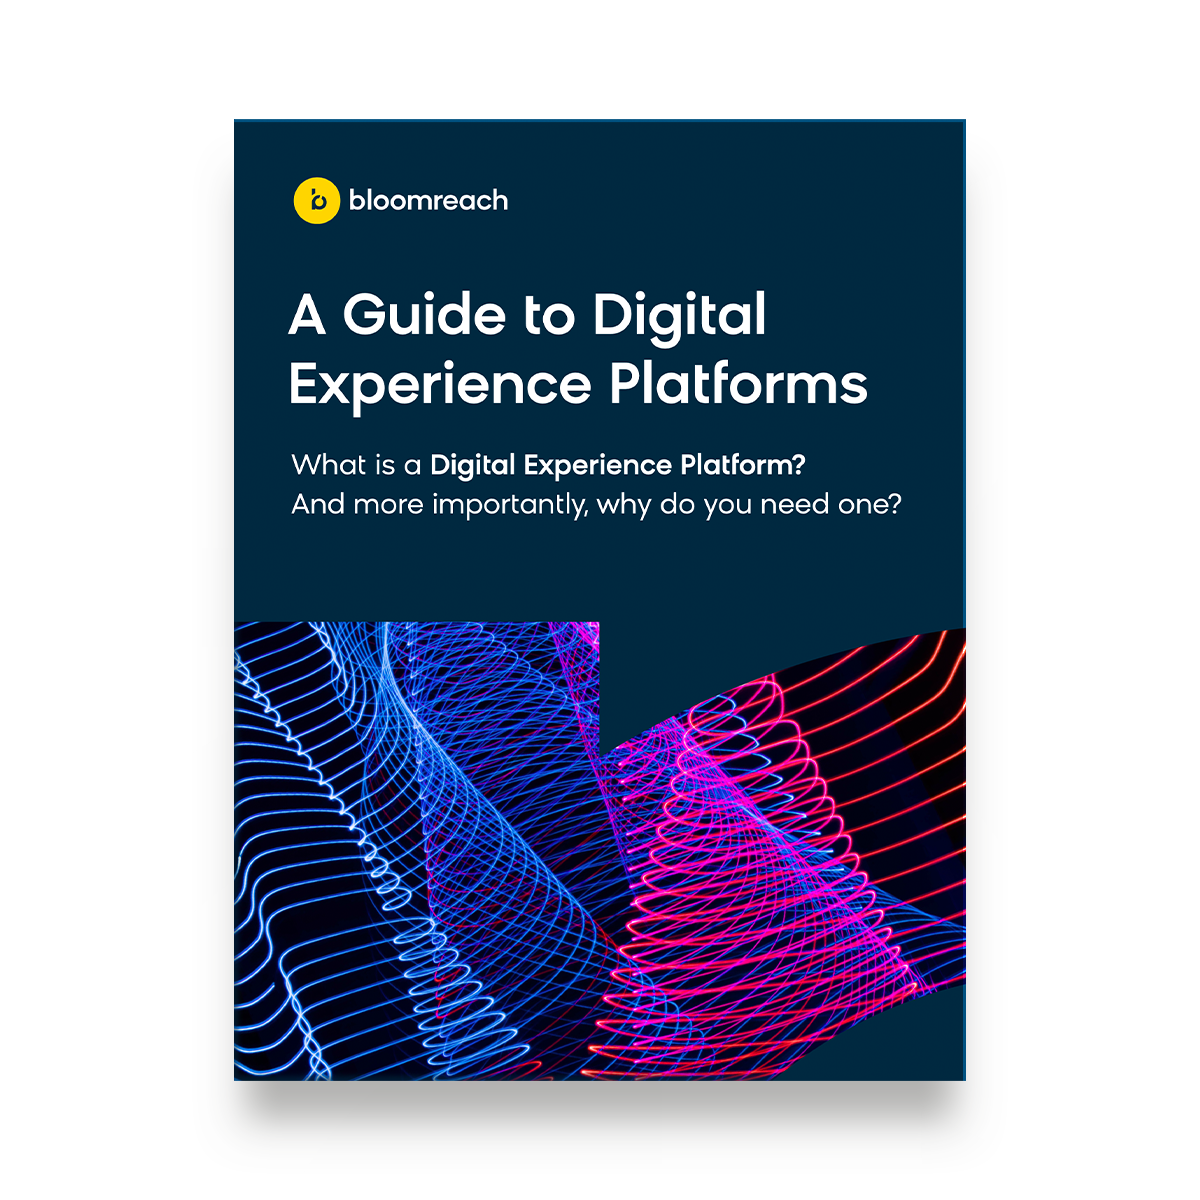 A Guide to Digital Experience Platforms